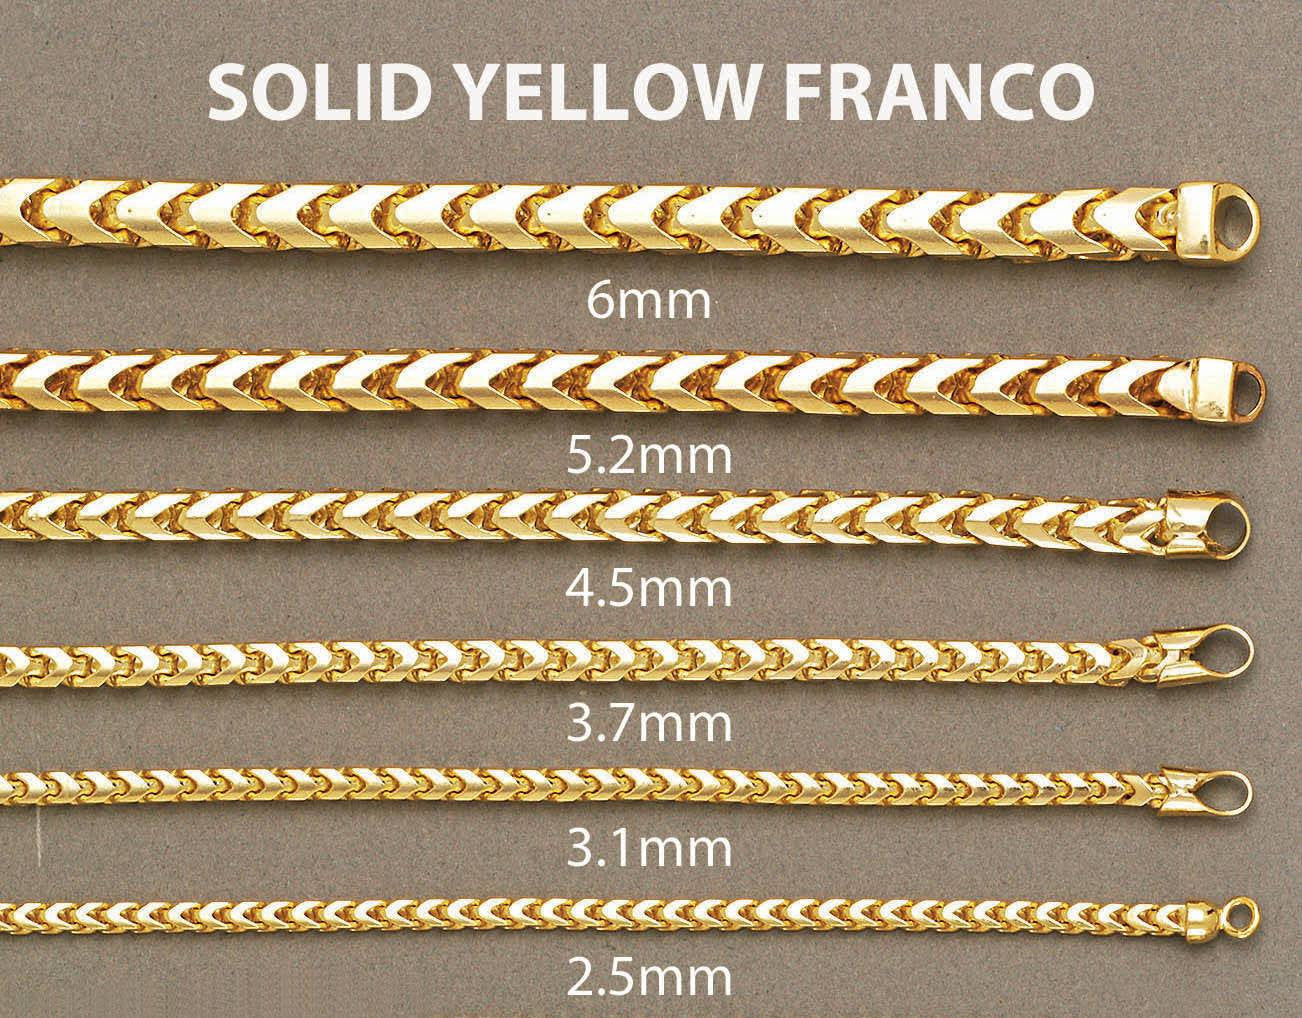 10k Yellow Solid Franco Chain